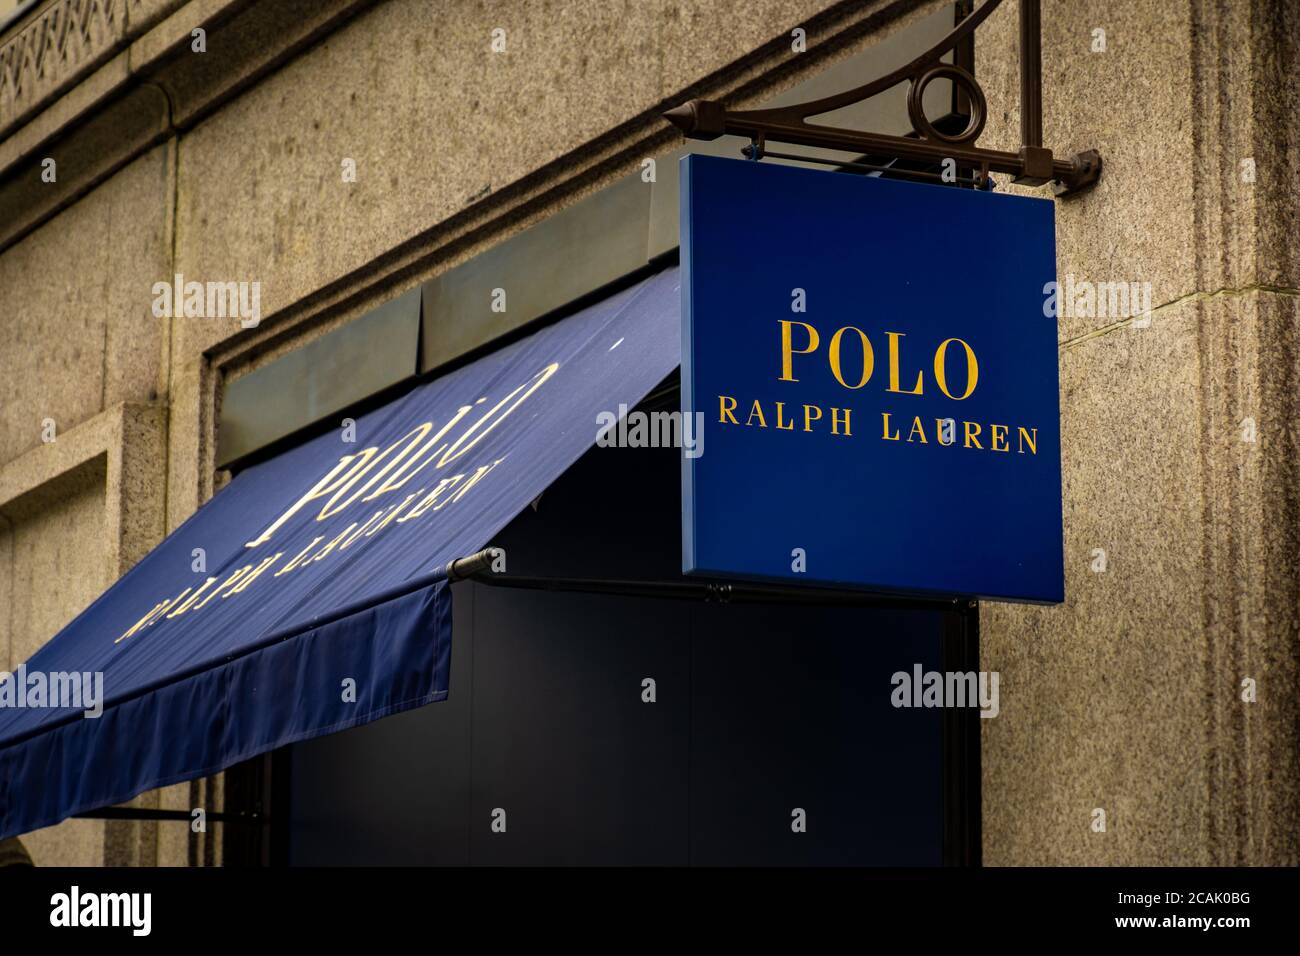 London- Polo Ralph Lauren retail store signage in London's West End Stock Photo